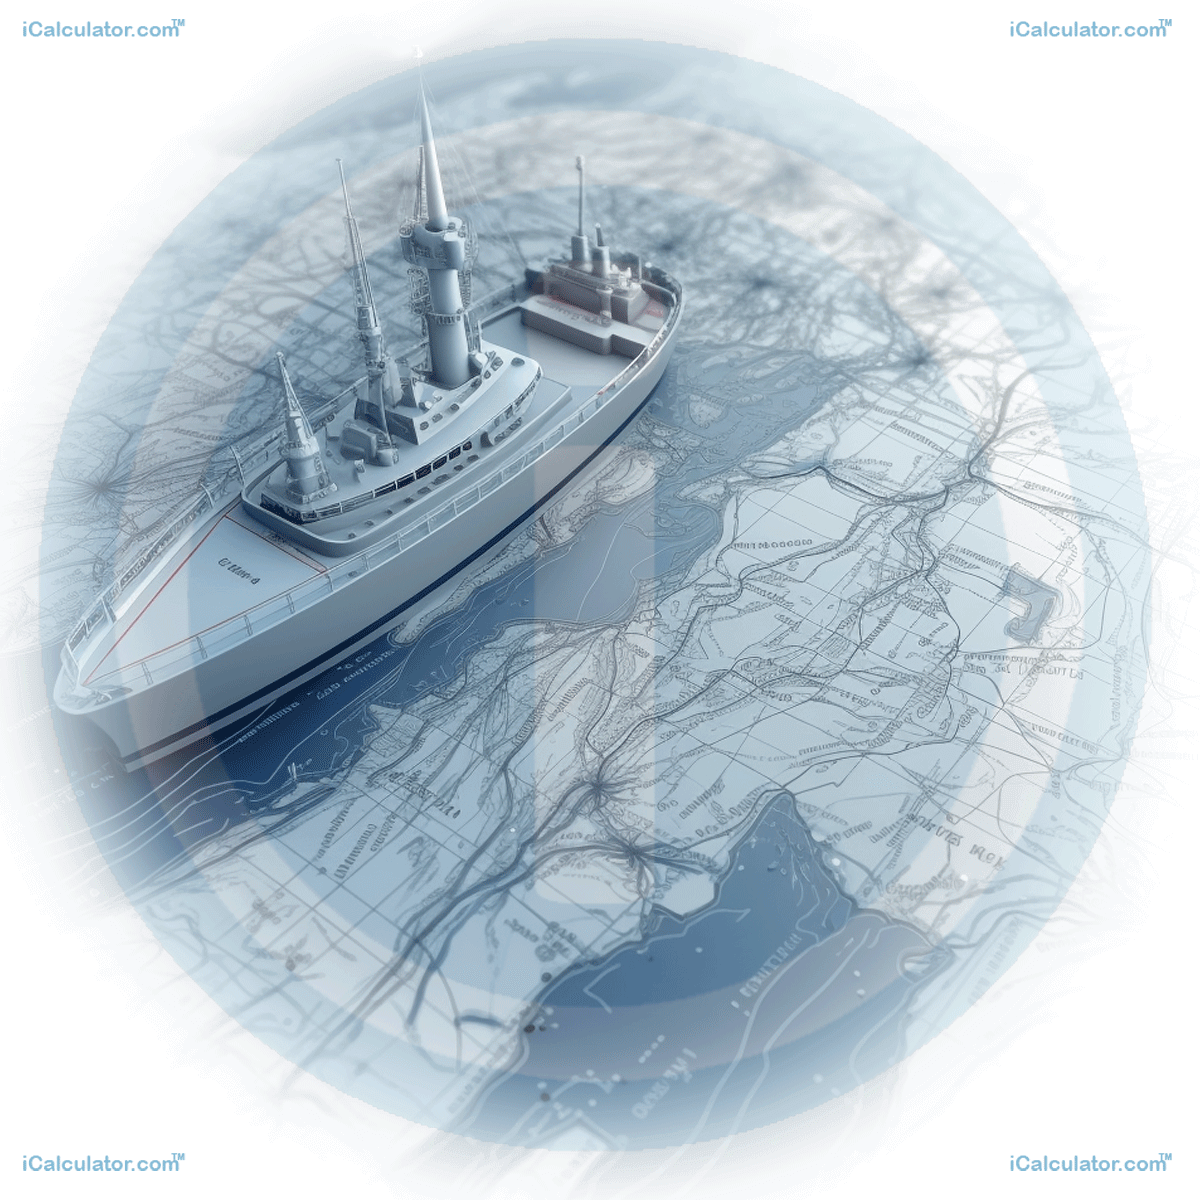 Learn about the nautical and statute mile converter calculator and its practical application in navigation. This tutorial provides an introduction to the concept, interesting facts, explanation of the formula, a real-life example, and more